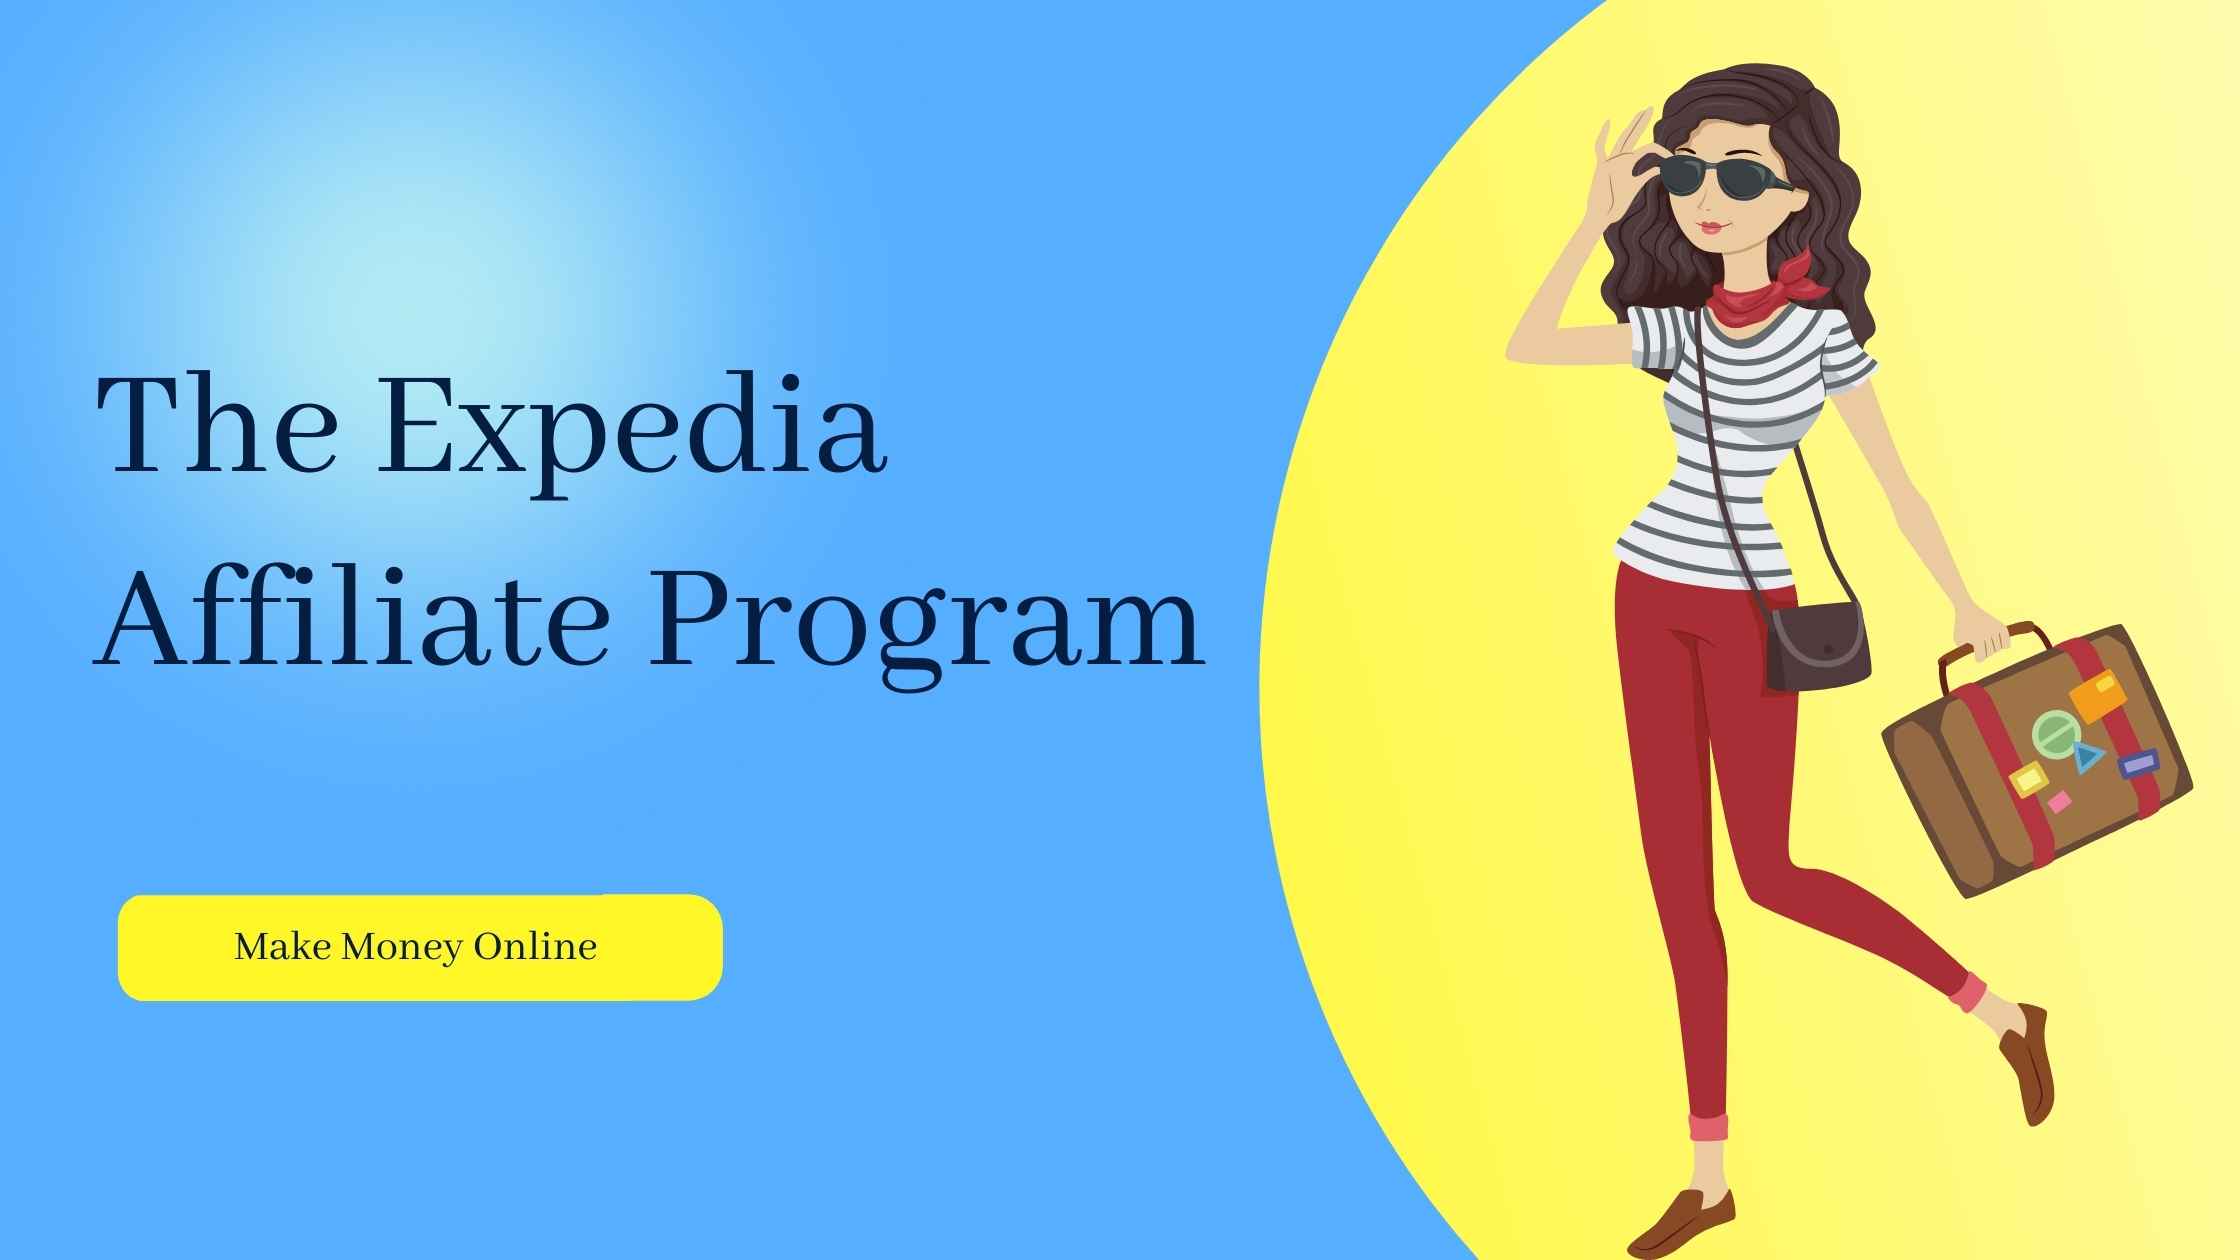 Expedia offers an affiliate program. Expedia provides a dedicated call center solely for its affiliates.